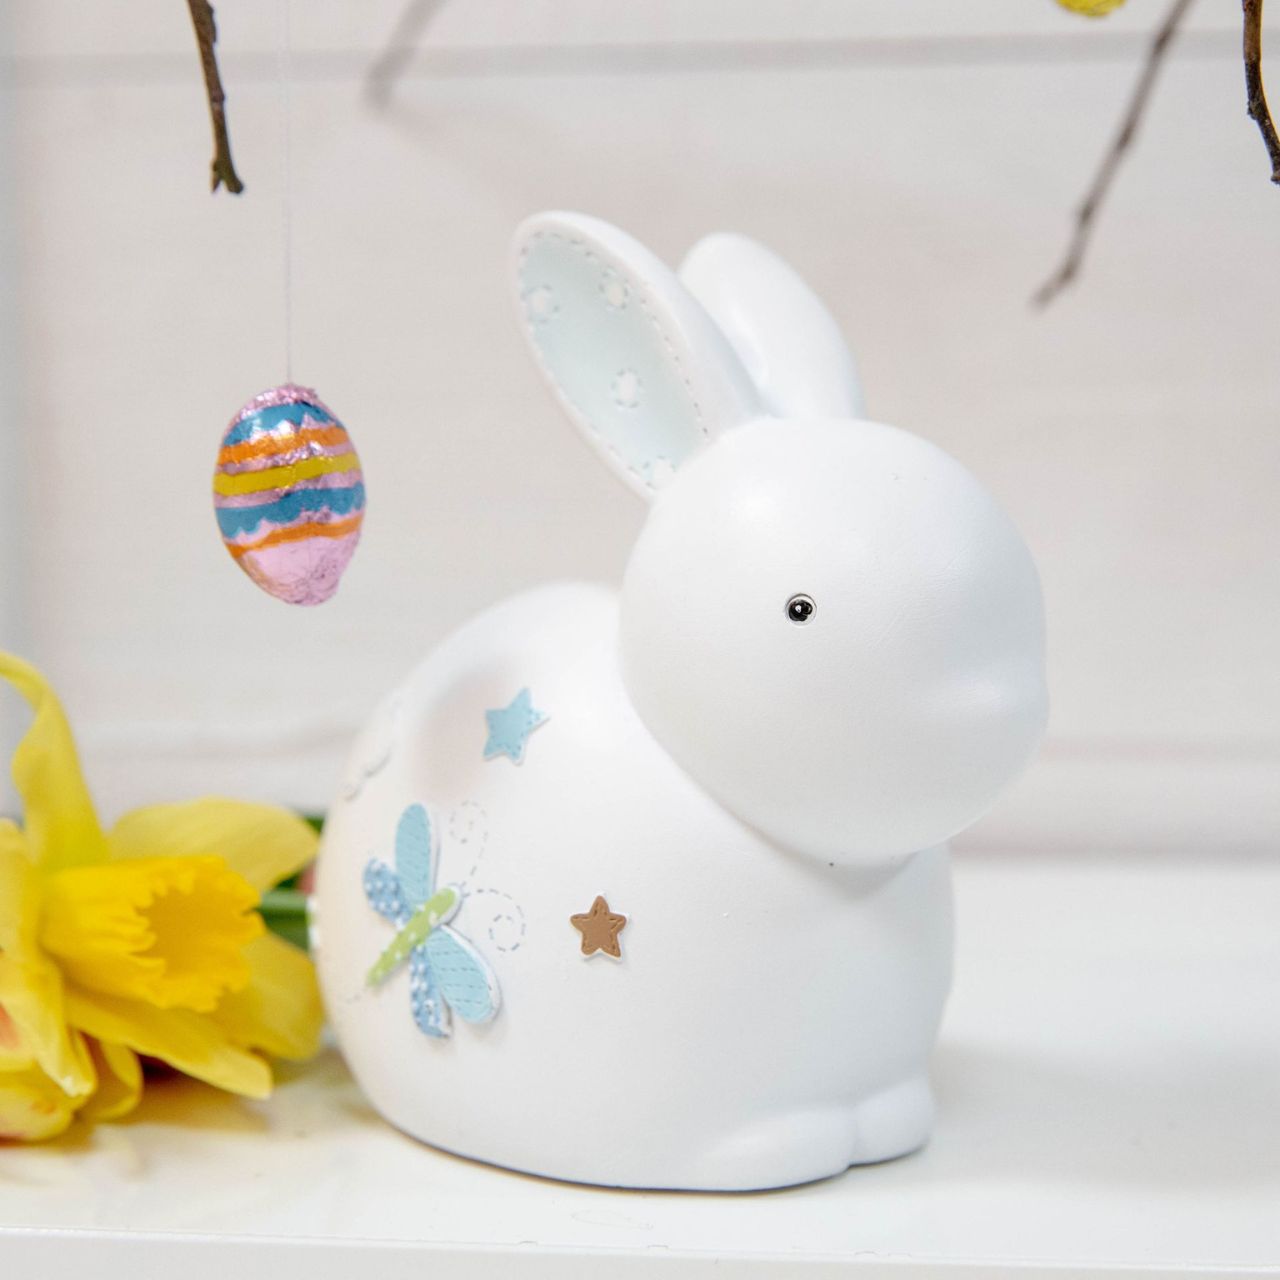 'Petit Cheri' Collection Money Box Blue Rabbit  Help a precious new arrival save for their very first rainy day with this adorable blue and white bunny rabbit money box. From the Petit Cheri Collection by CELEBRATIONS - vintage, rustic and utterly charming gifts for your little darling.